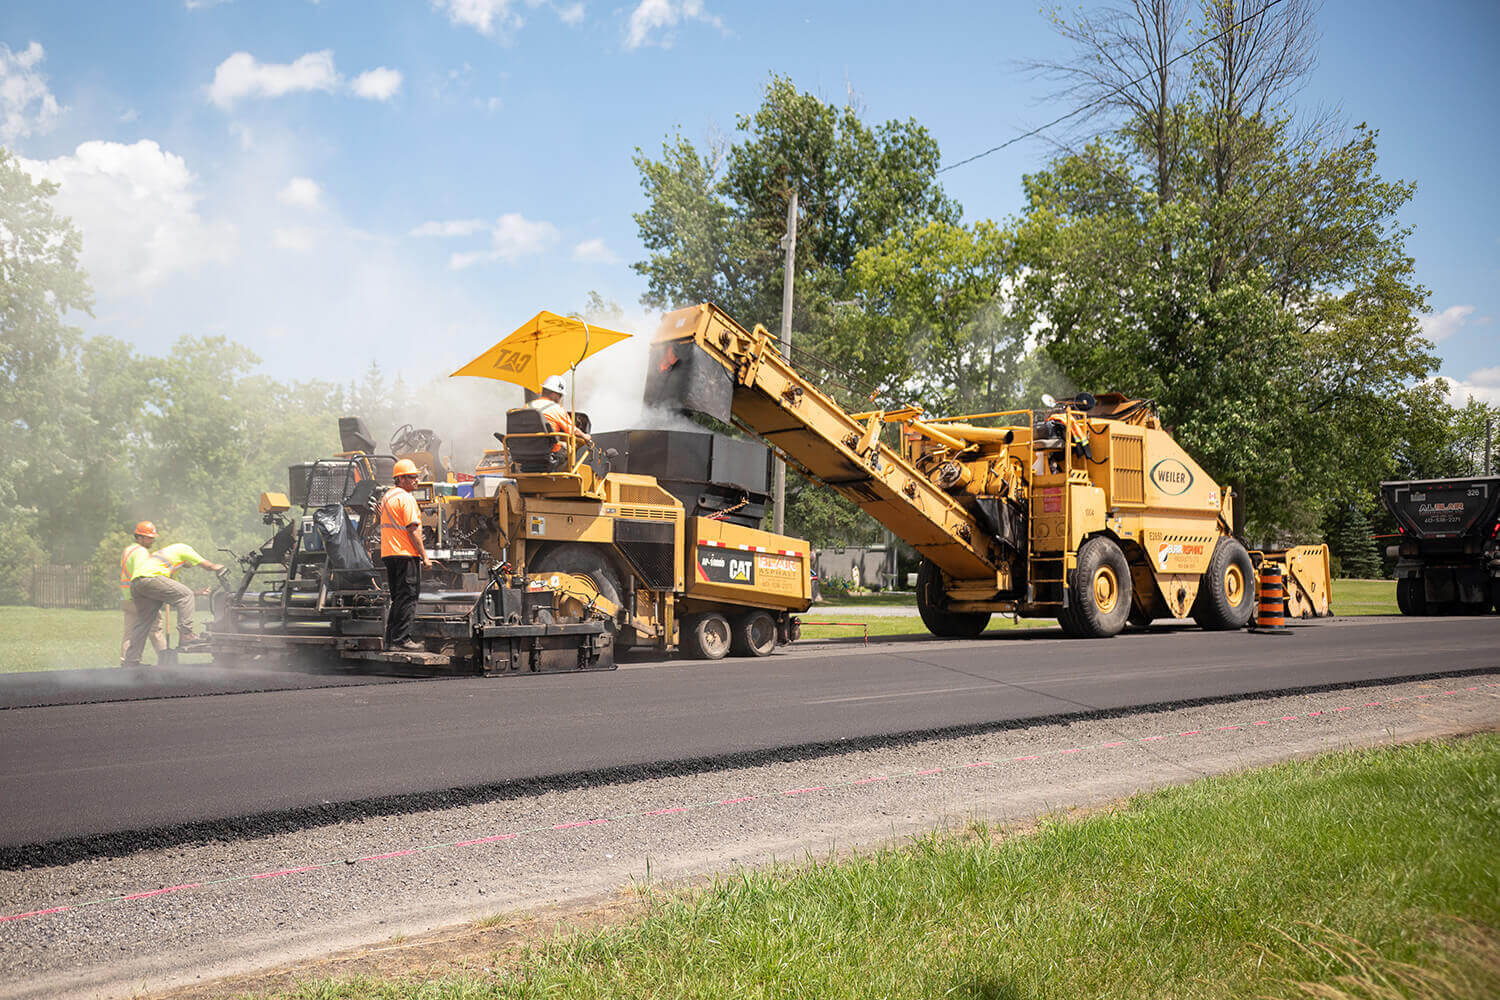 A.L. Blair construction doing road constructions by applying freshly new asphalt to the road